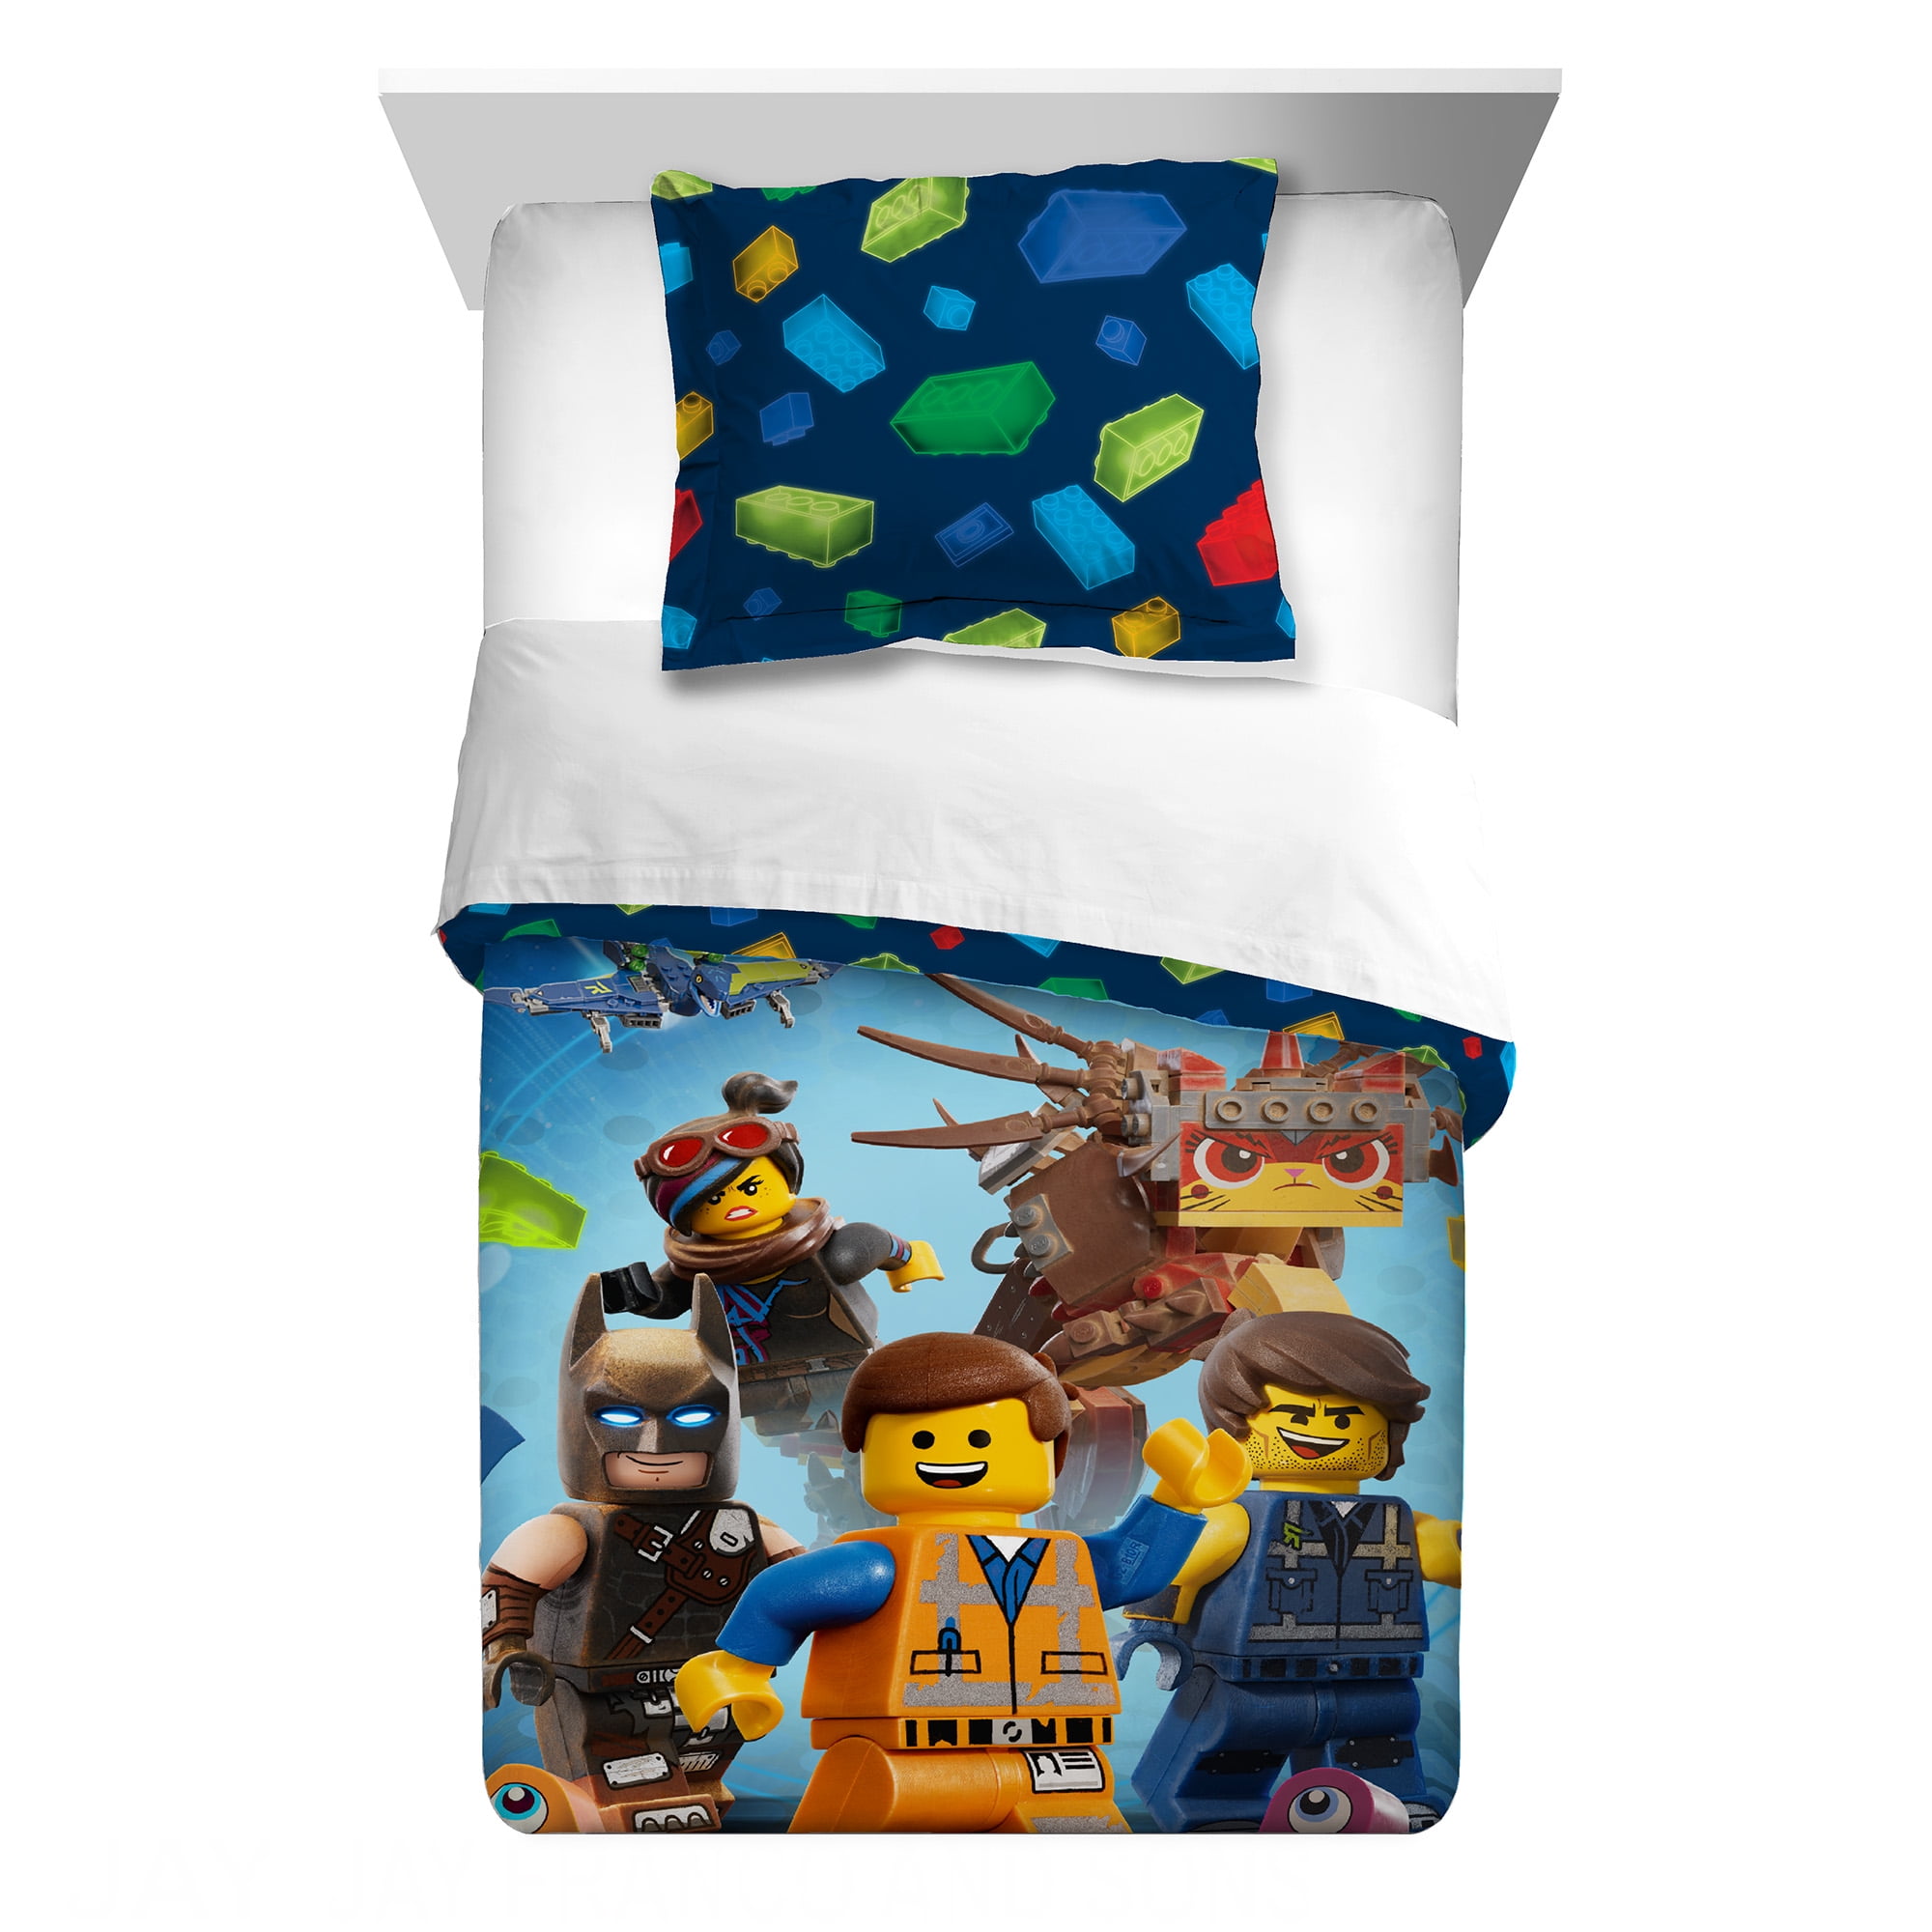 Details about   The Lego Movie Microfiber Twin Comforter Super Soft New 